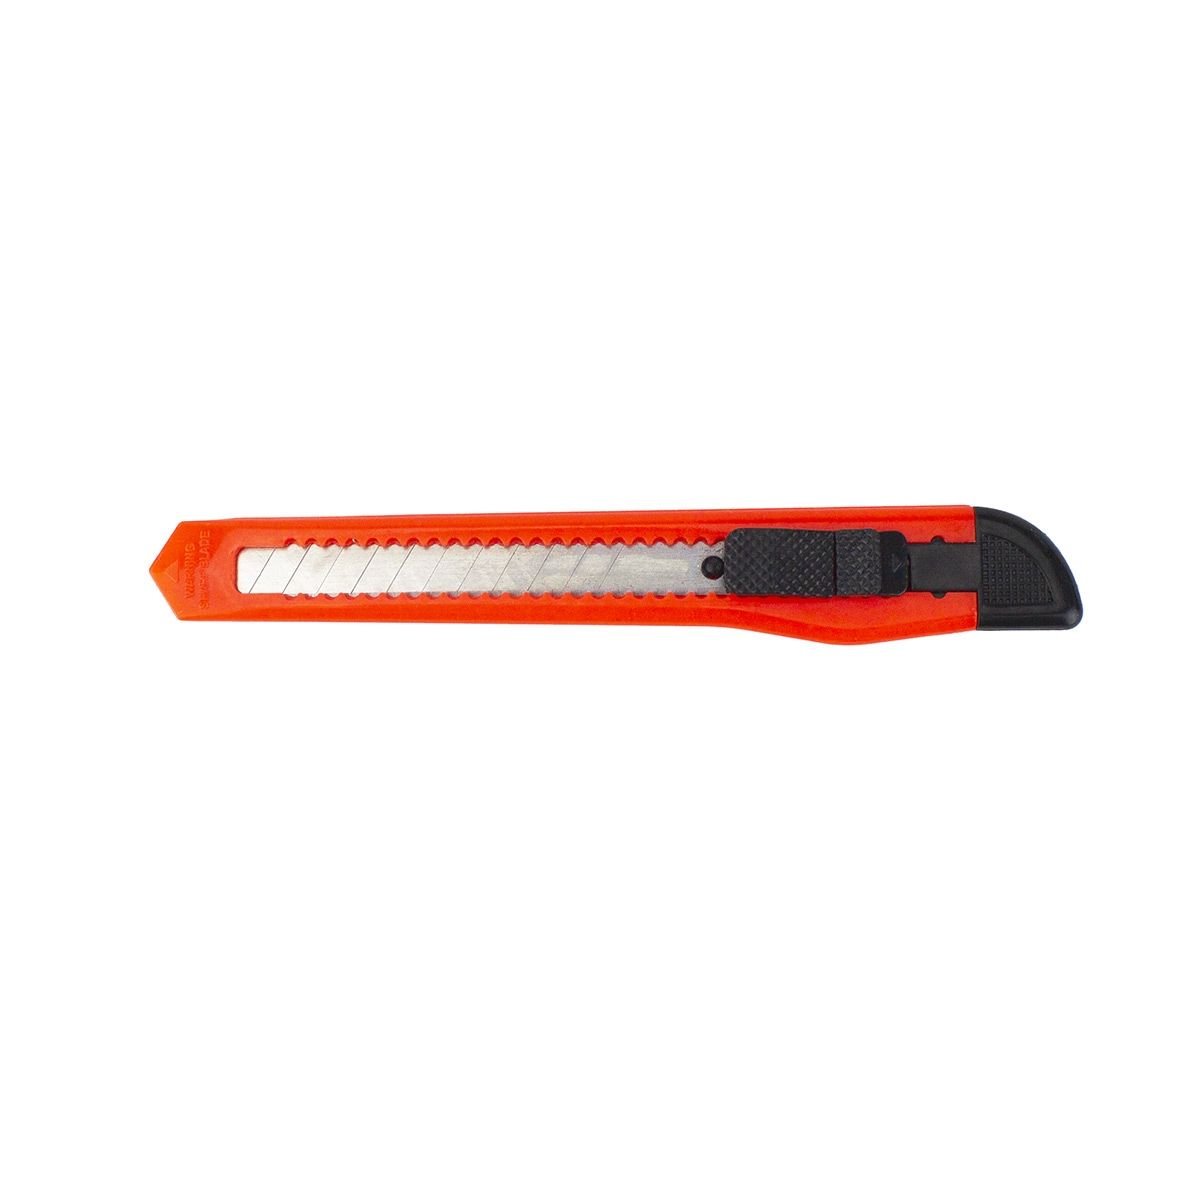 Excel Blades Heavy Duty Plastic Retractable Box Cutter, 18MM Snap